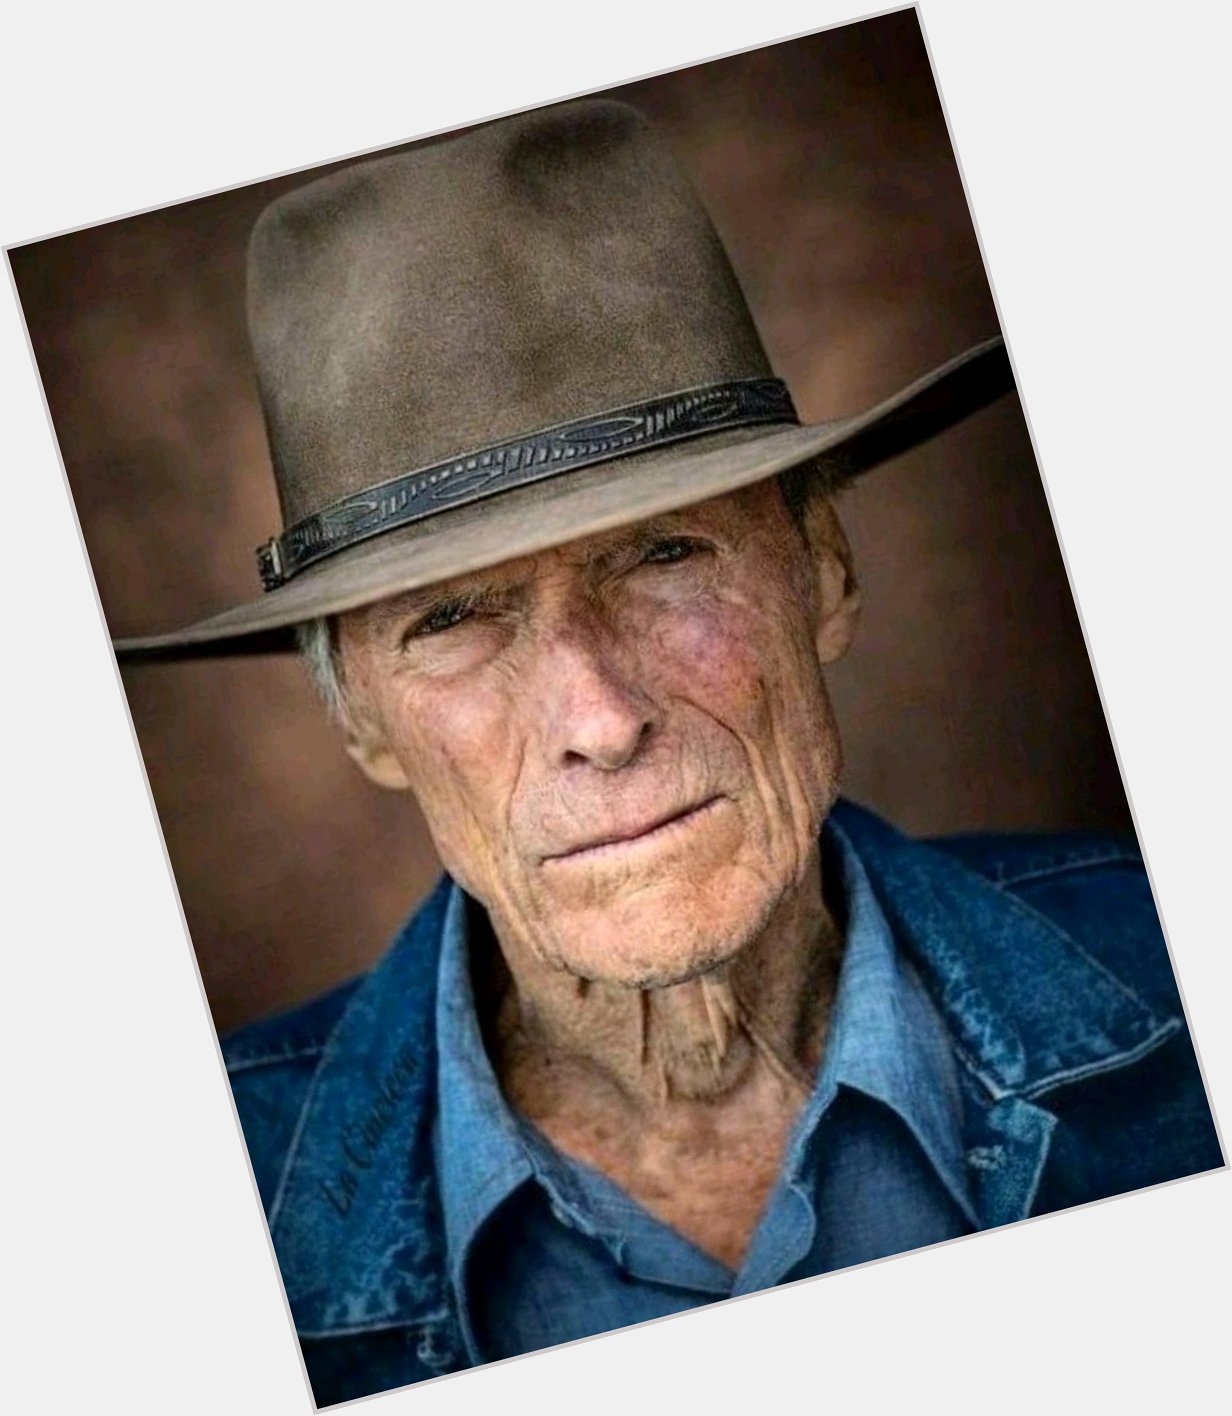 Join me in wishing
Clint Eastwood a
Happy 92nd Birthday 